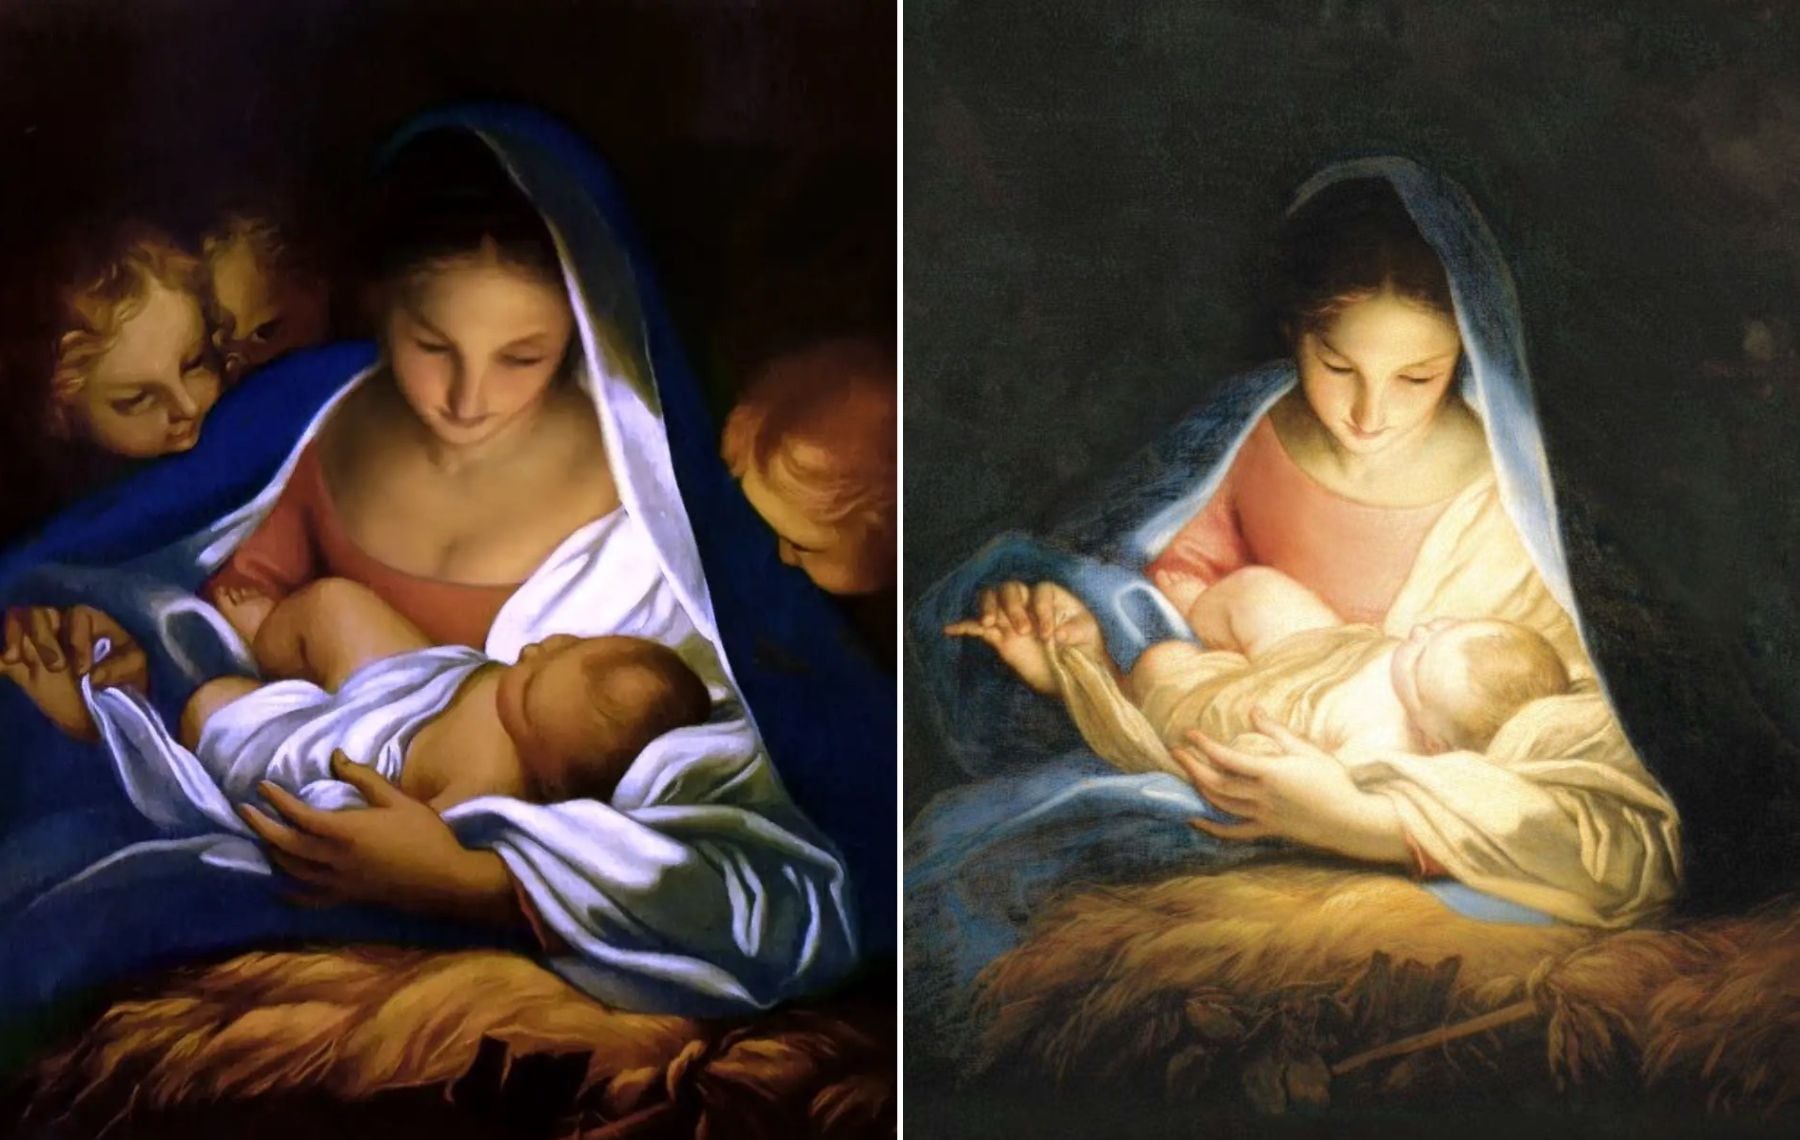 The original version of Carlo Maratta’s painting, titled “The Holy Night” or “The Nativity,” at left. An edited version on the right was used in materials for The Church of Jesus Christ of Latter-day Saints.